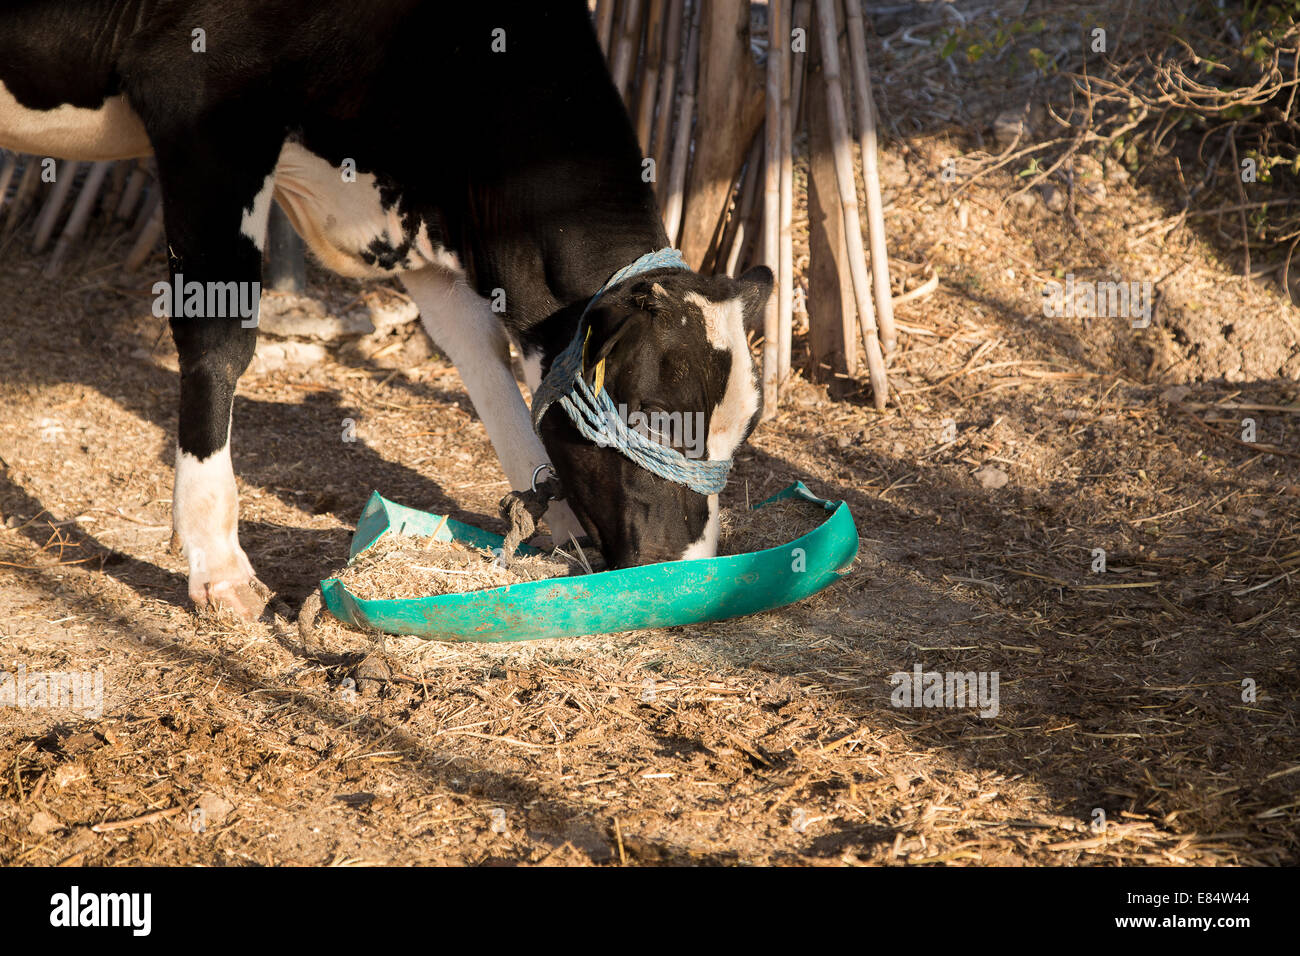 8+ Thousand Cow Eating Straw Royalty-Free Images, Stock Photos & Pictures